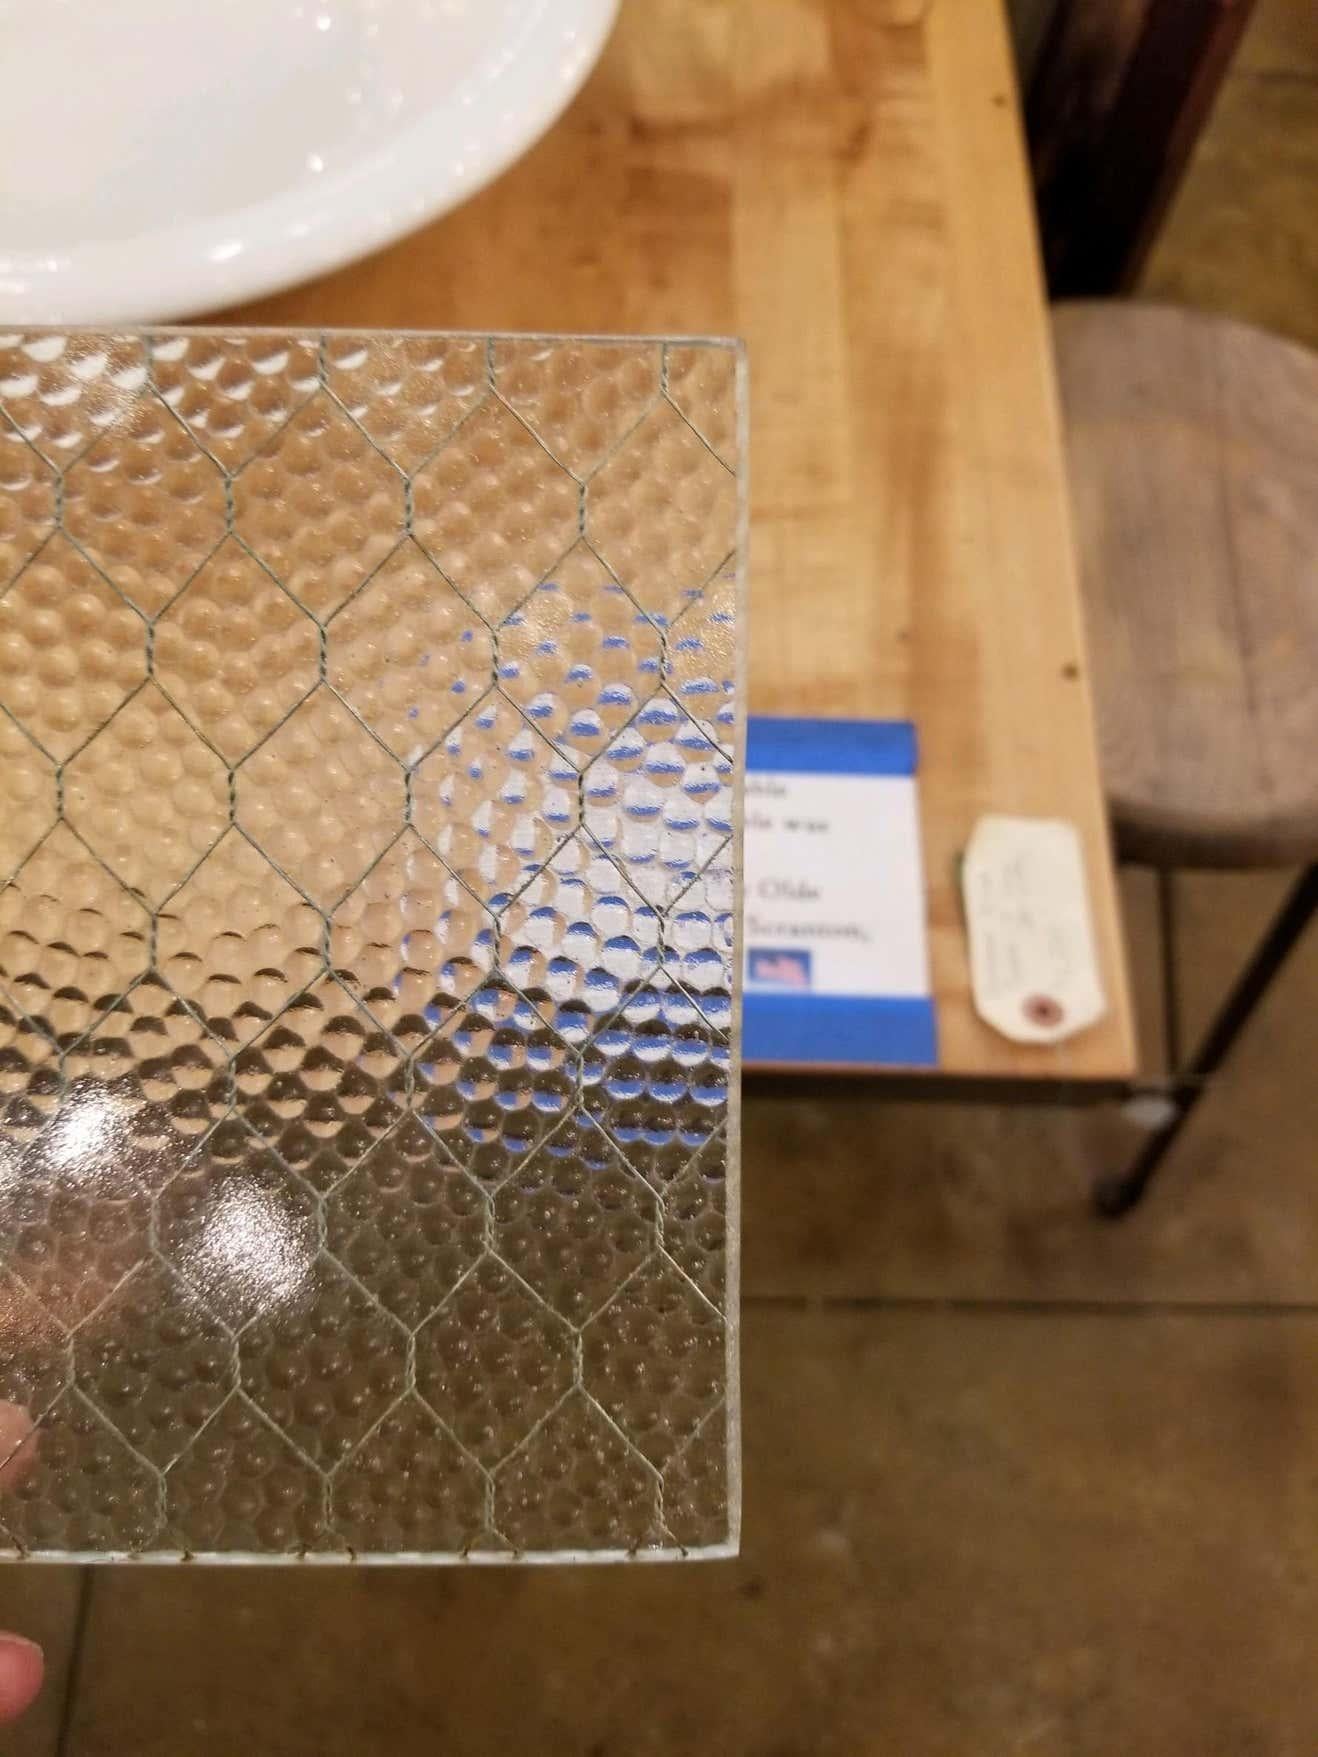 Two pieces for this pebbled chicken wire glass set. 14 inches x 40 7/8 inches x 1/4 inch. Bigger sizes available.

1920s 'Pebbled' vintage chicken wire glass. All of our chicken wire glass is salvaged from old factory windows and doors. Sizes may